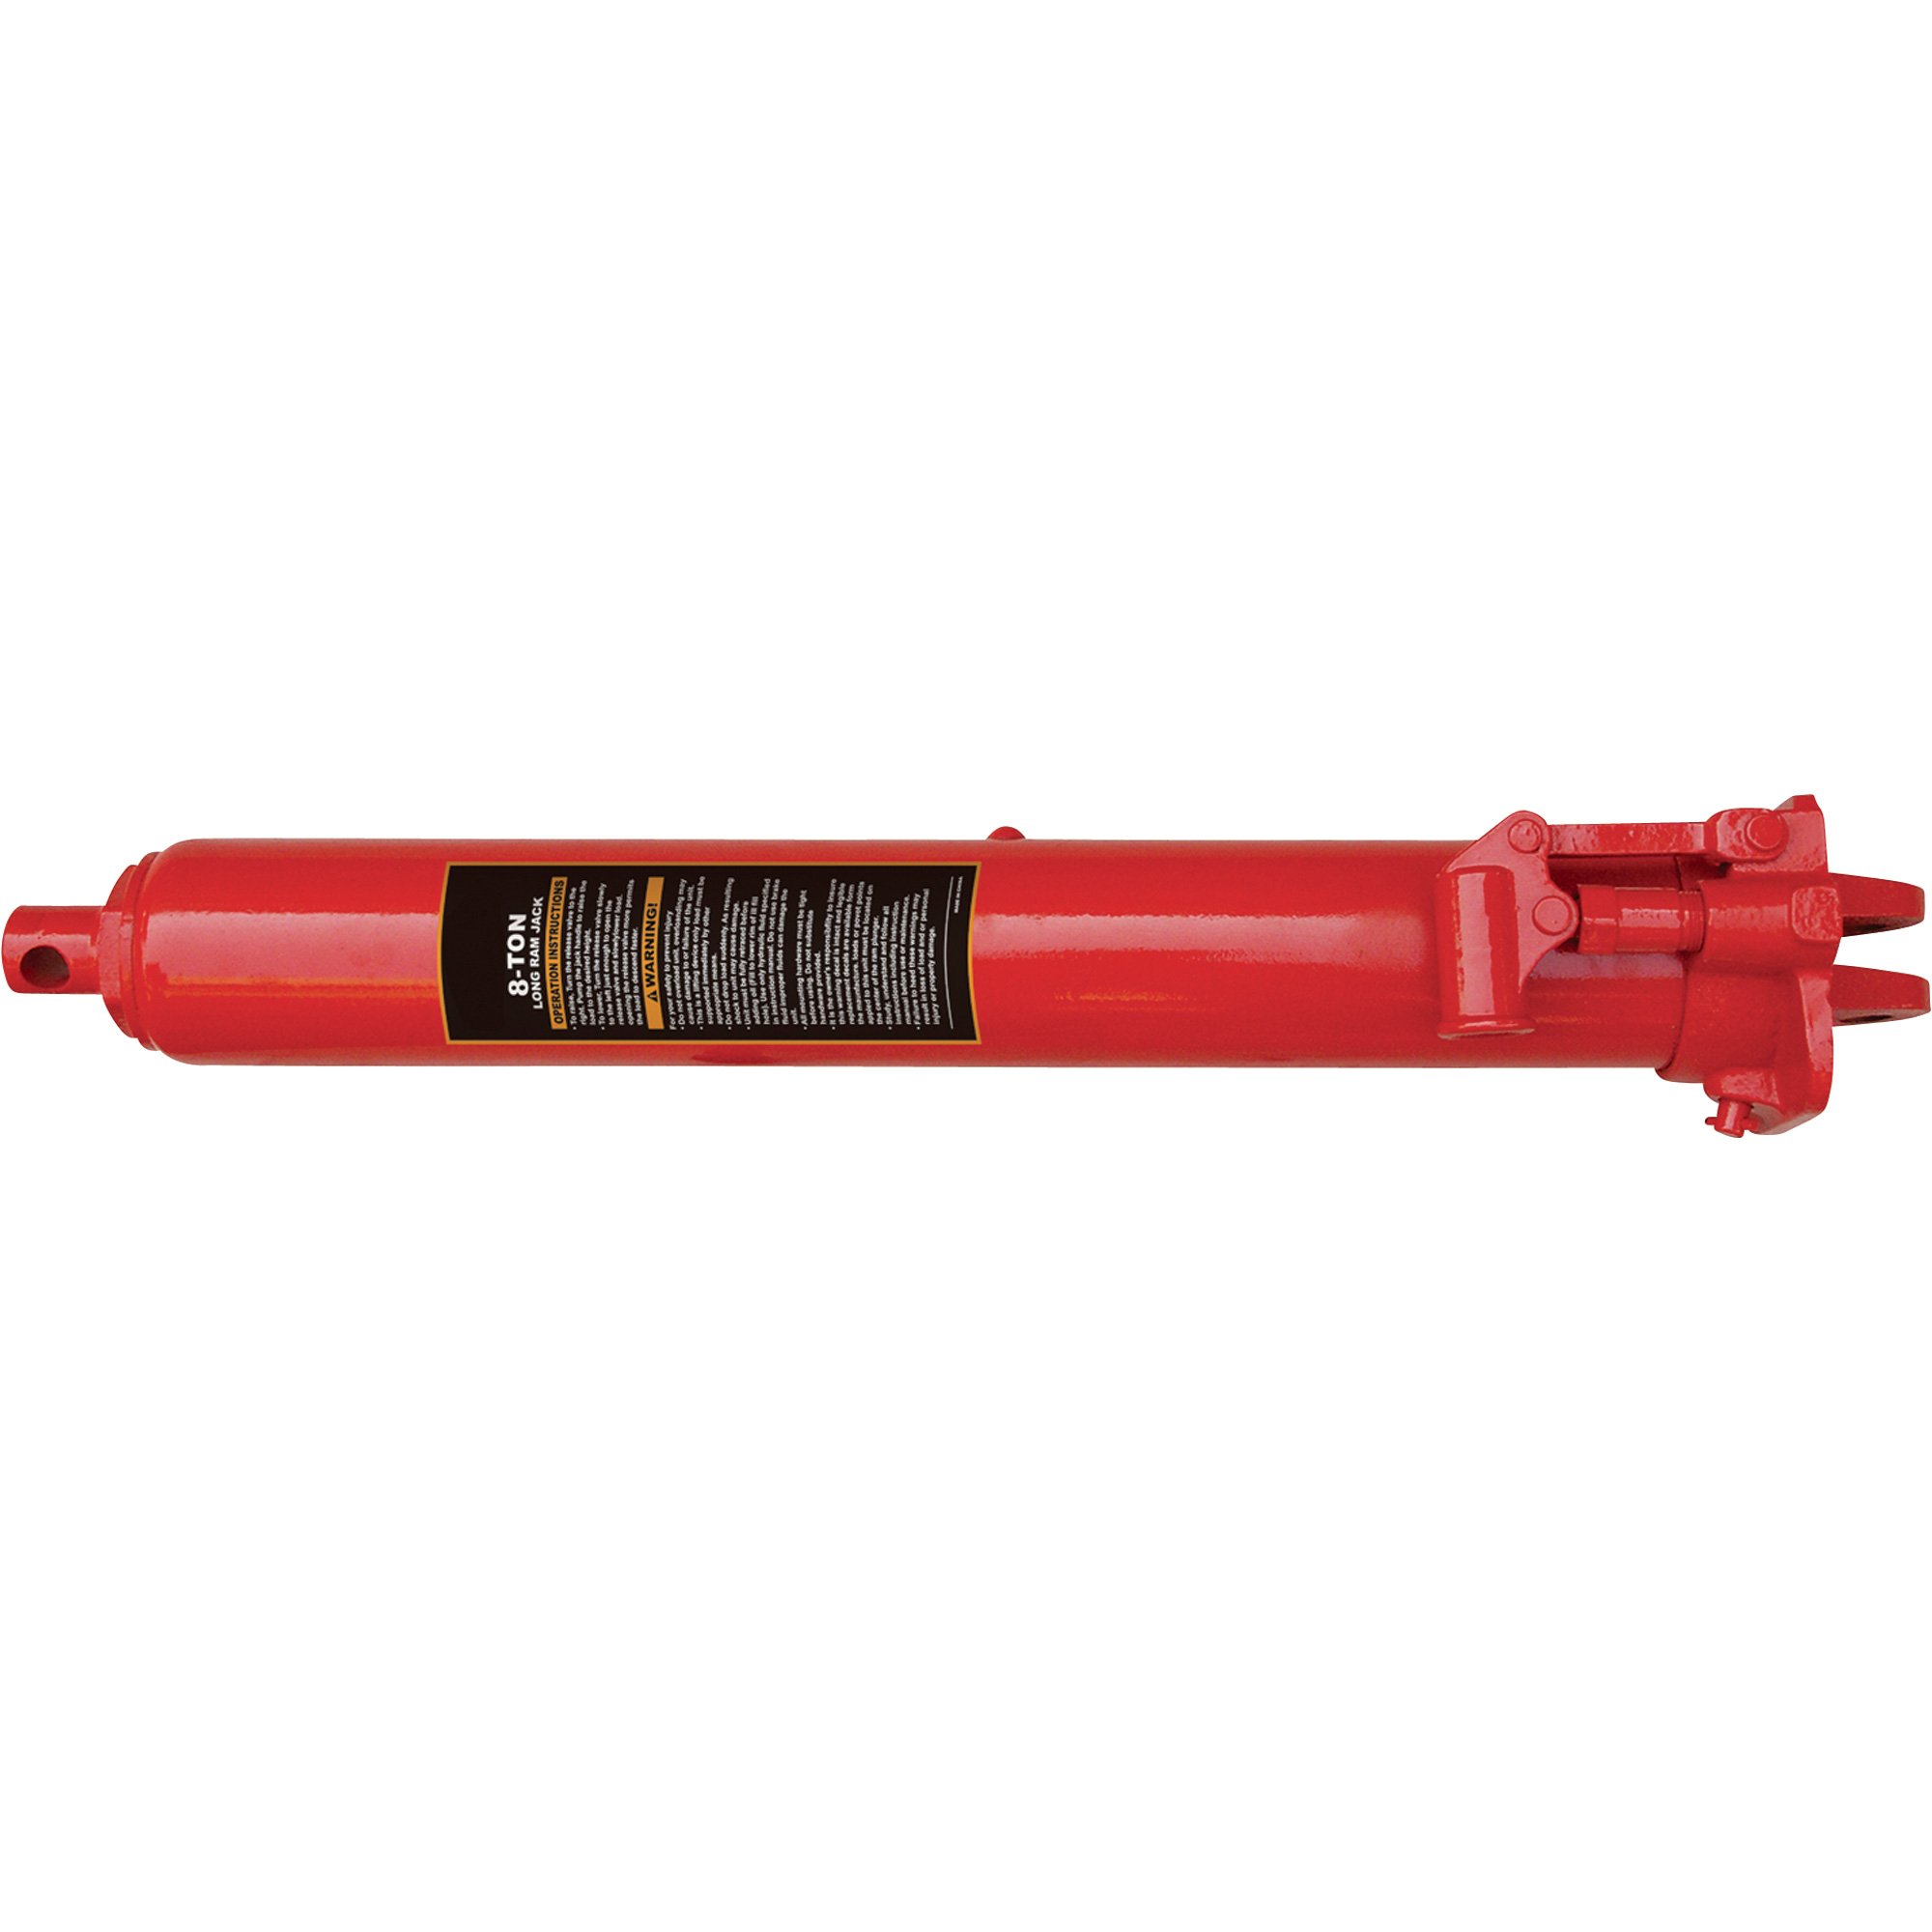 Please see replacement item# 46215. Torin Long Ram Double Piston Hydraulic  Jack — Ton, Clevis Bottom Style, Model# T30308 Northern Tool